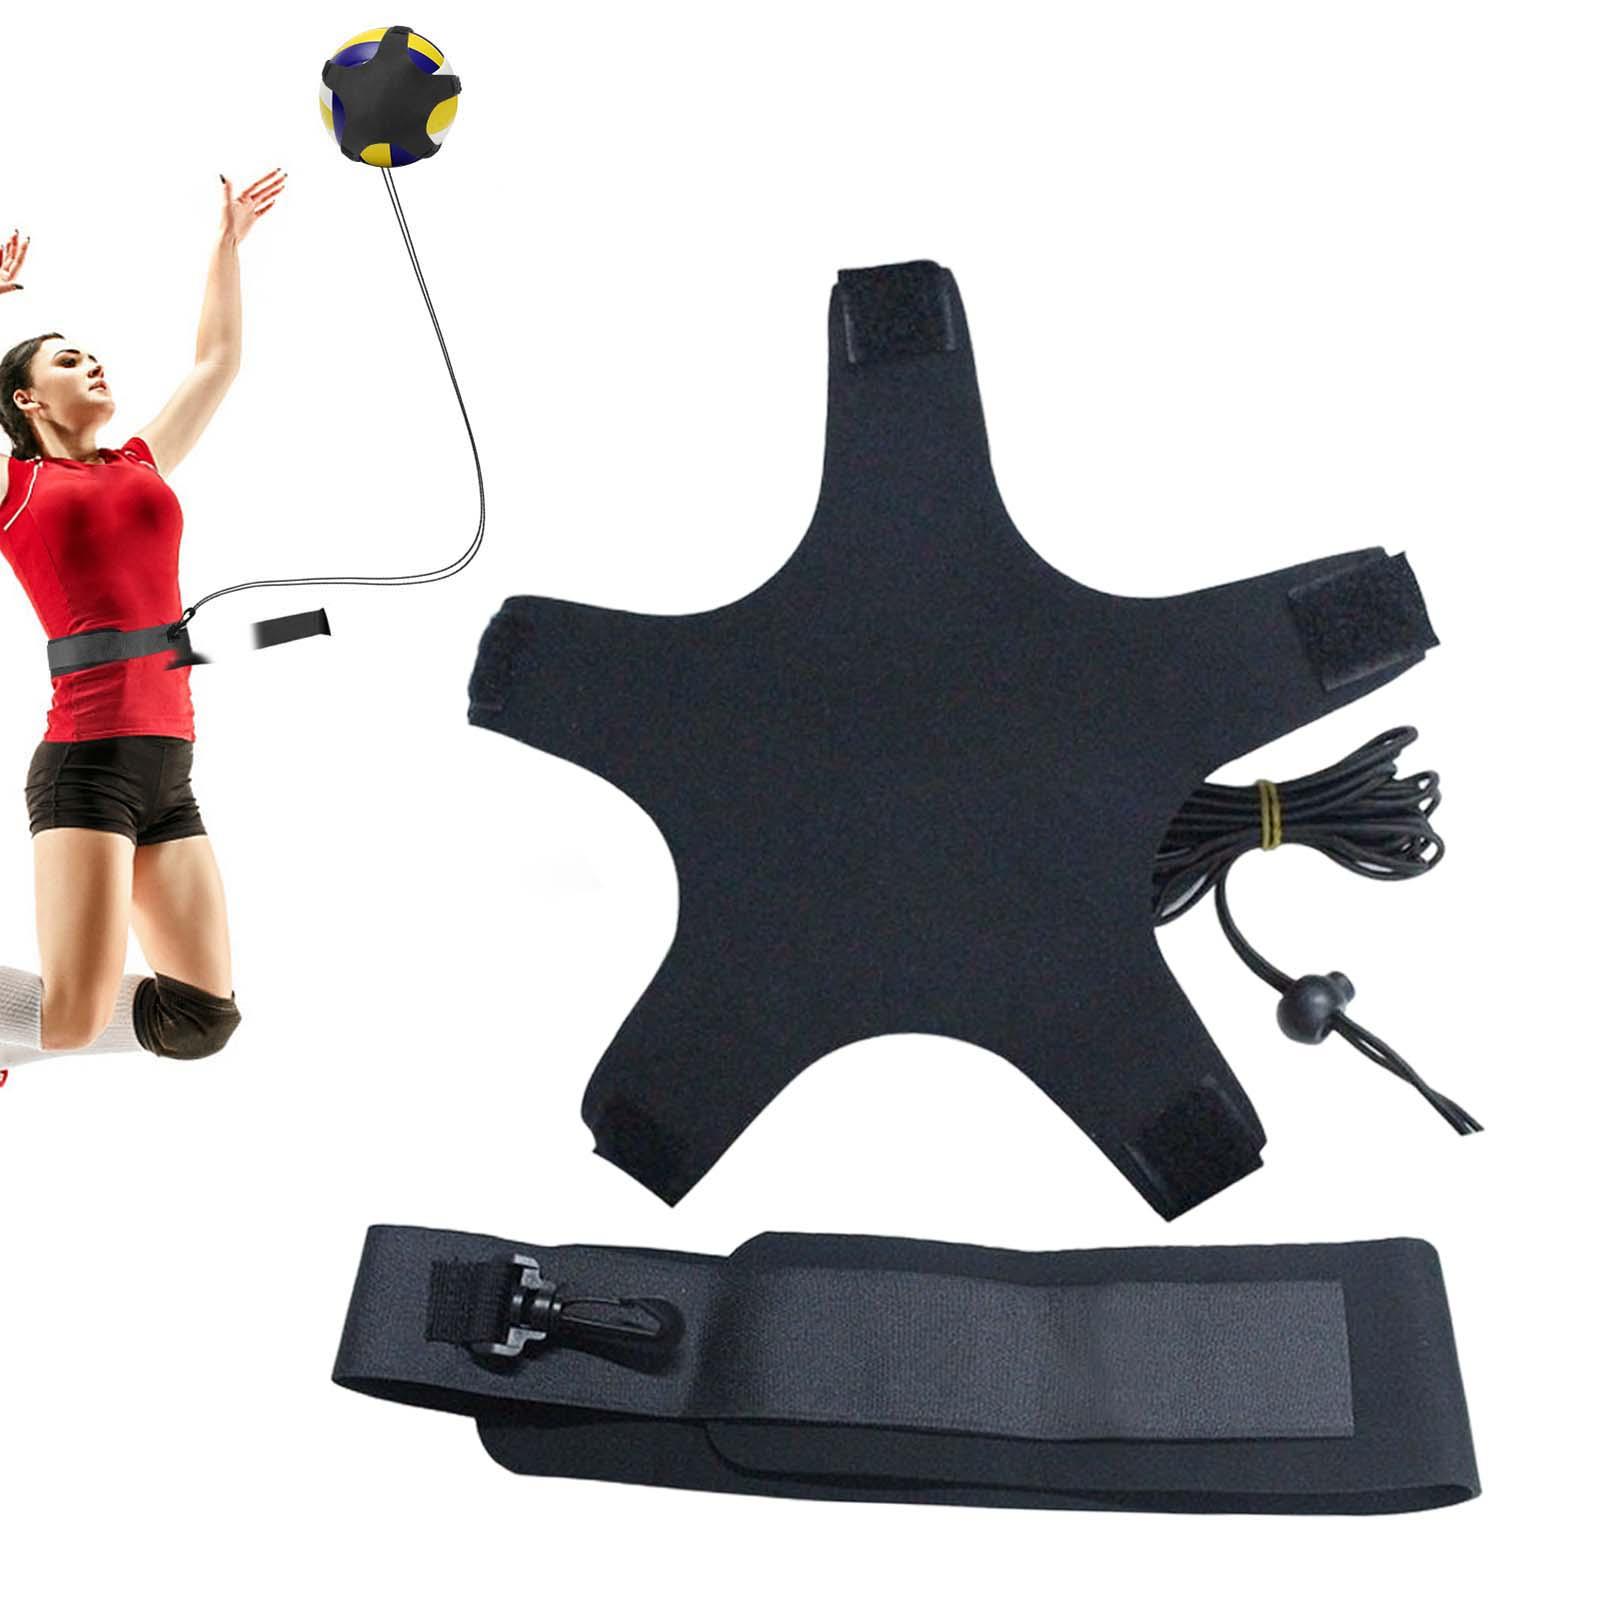 Volleyball Training Equipment Solo Practice for Beginners Setting Arm Swing